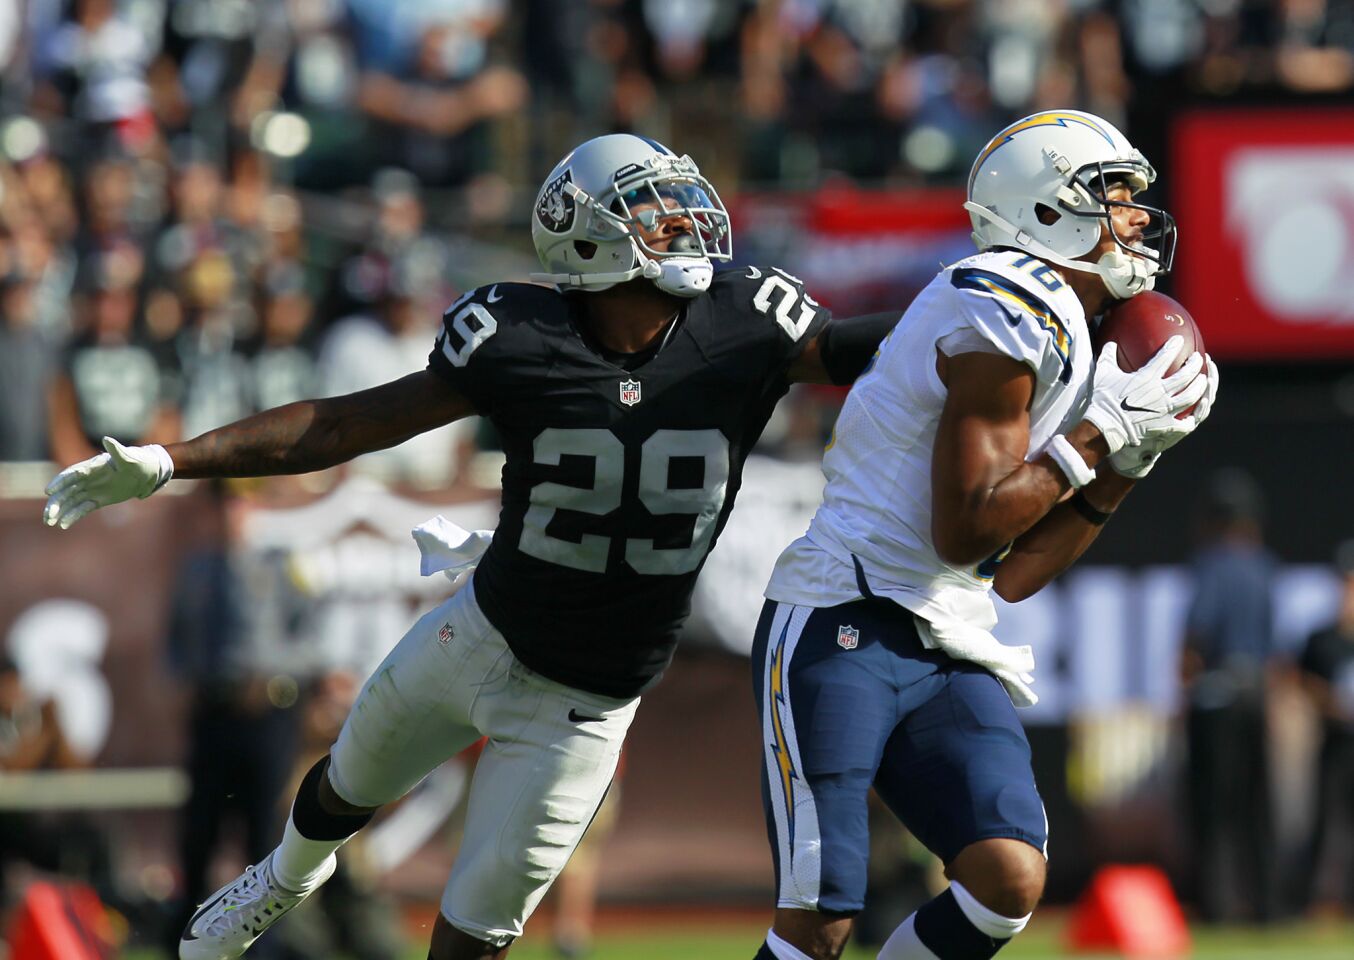 San Diego Chargers Tyrell Williams makes a catch in front of Raiders David Amerson in the 3rd quarter in Oakland on Oct. 9, 2016. (Photo by K.C. Alfred/The San Diego Union-Tribune)